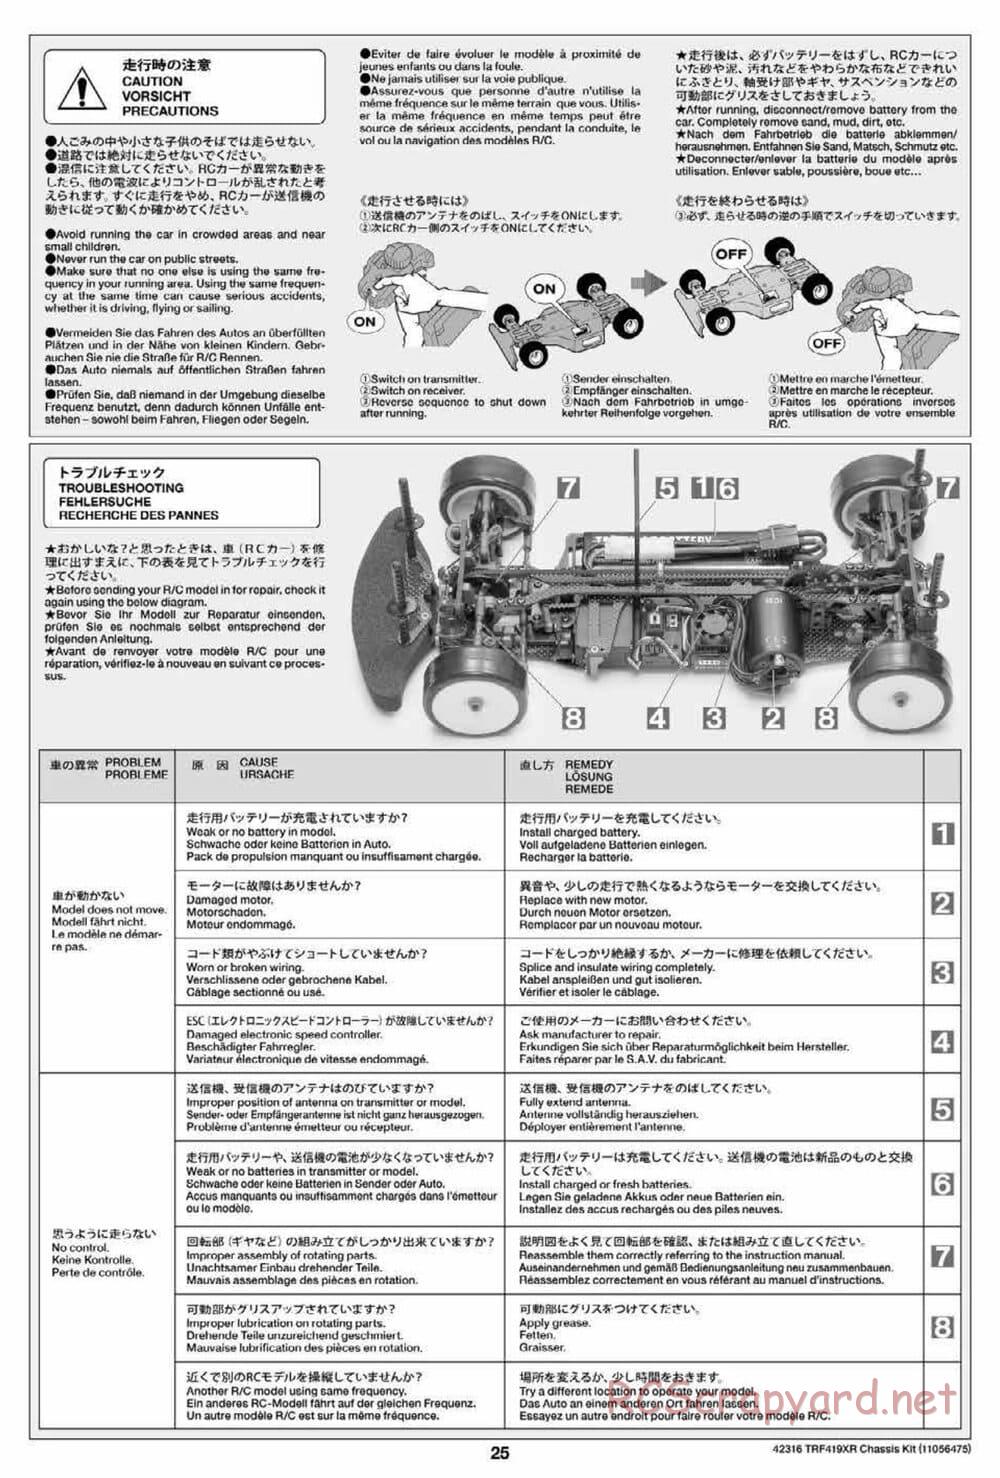 Tamiya - TRF419XR Chassis - Manual - Page 25